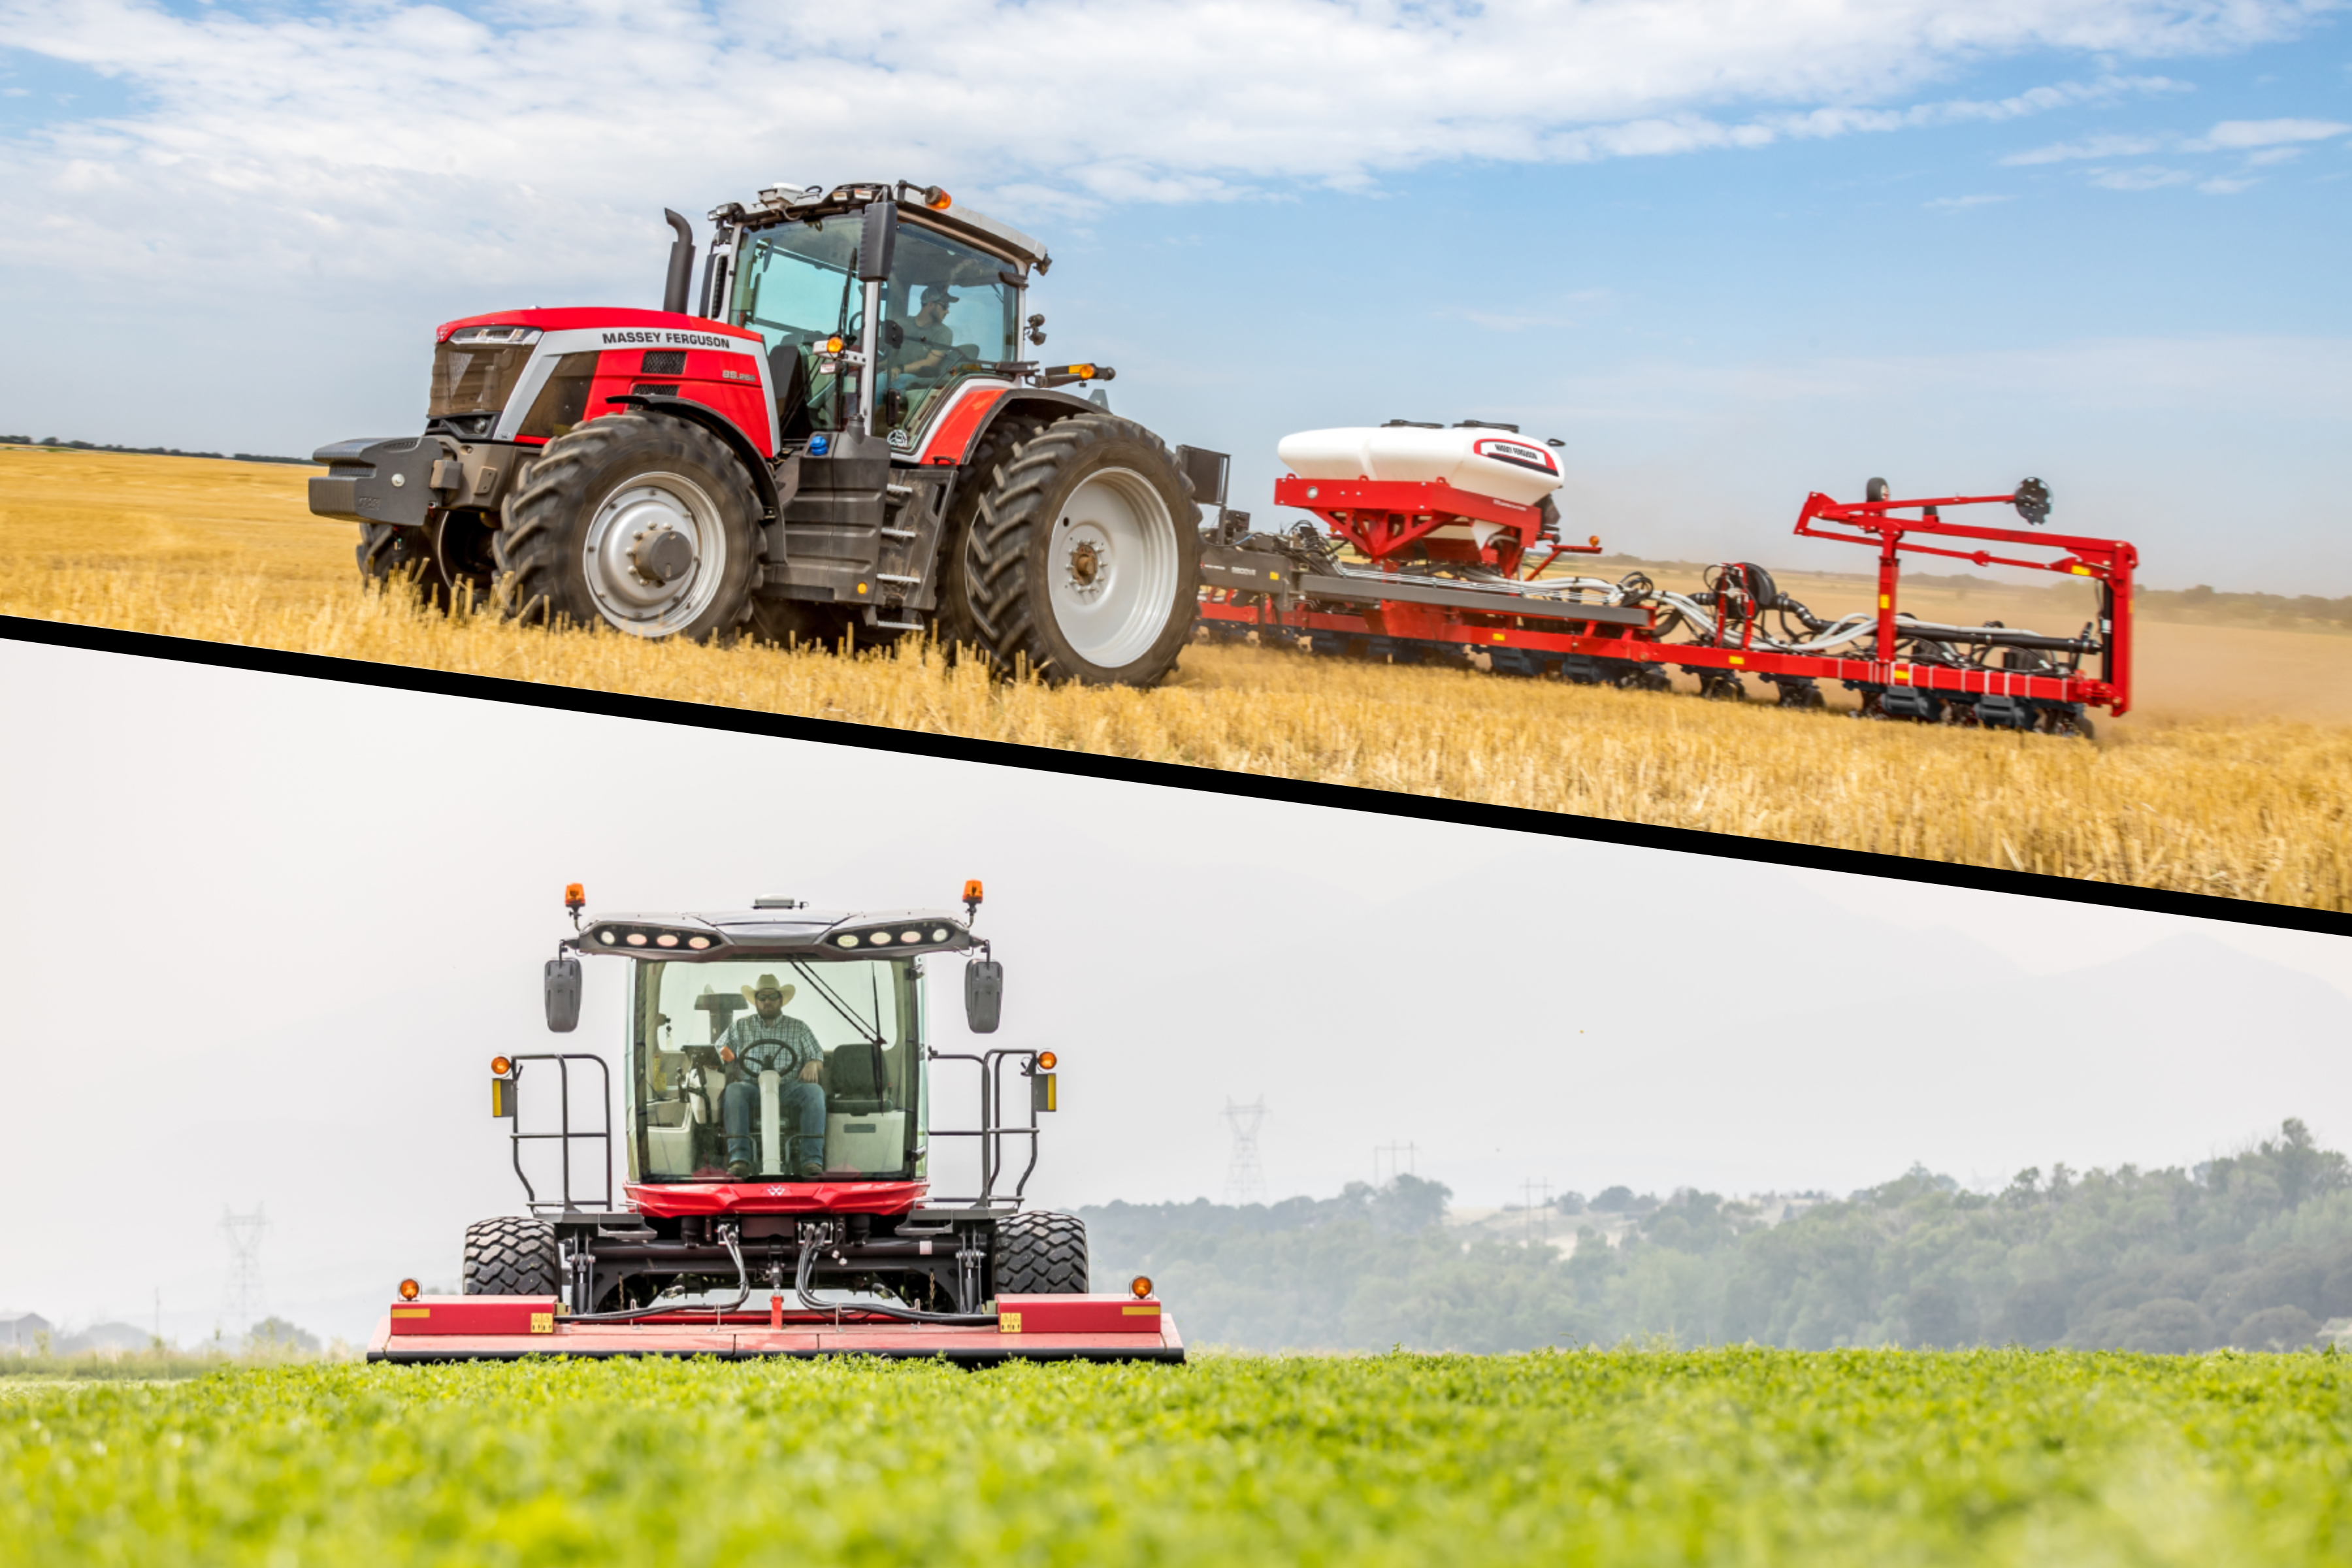 Massey Ferguson 8S tractor introduced by AGCO Corp. - Vegetable Growers News